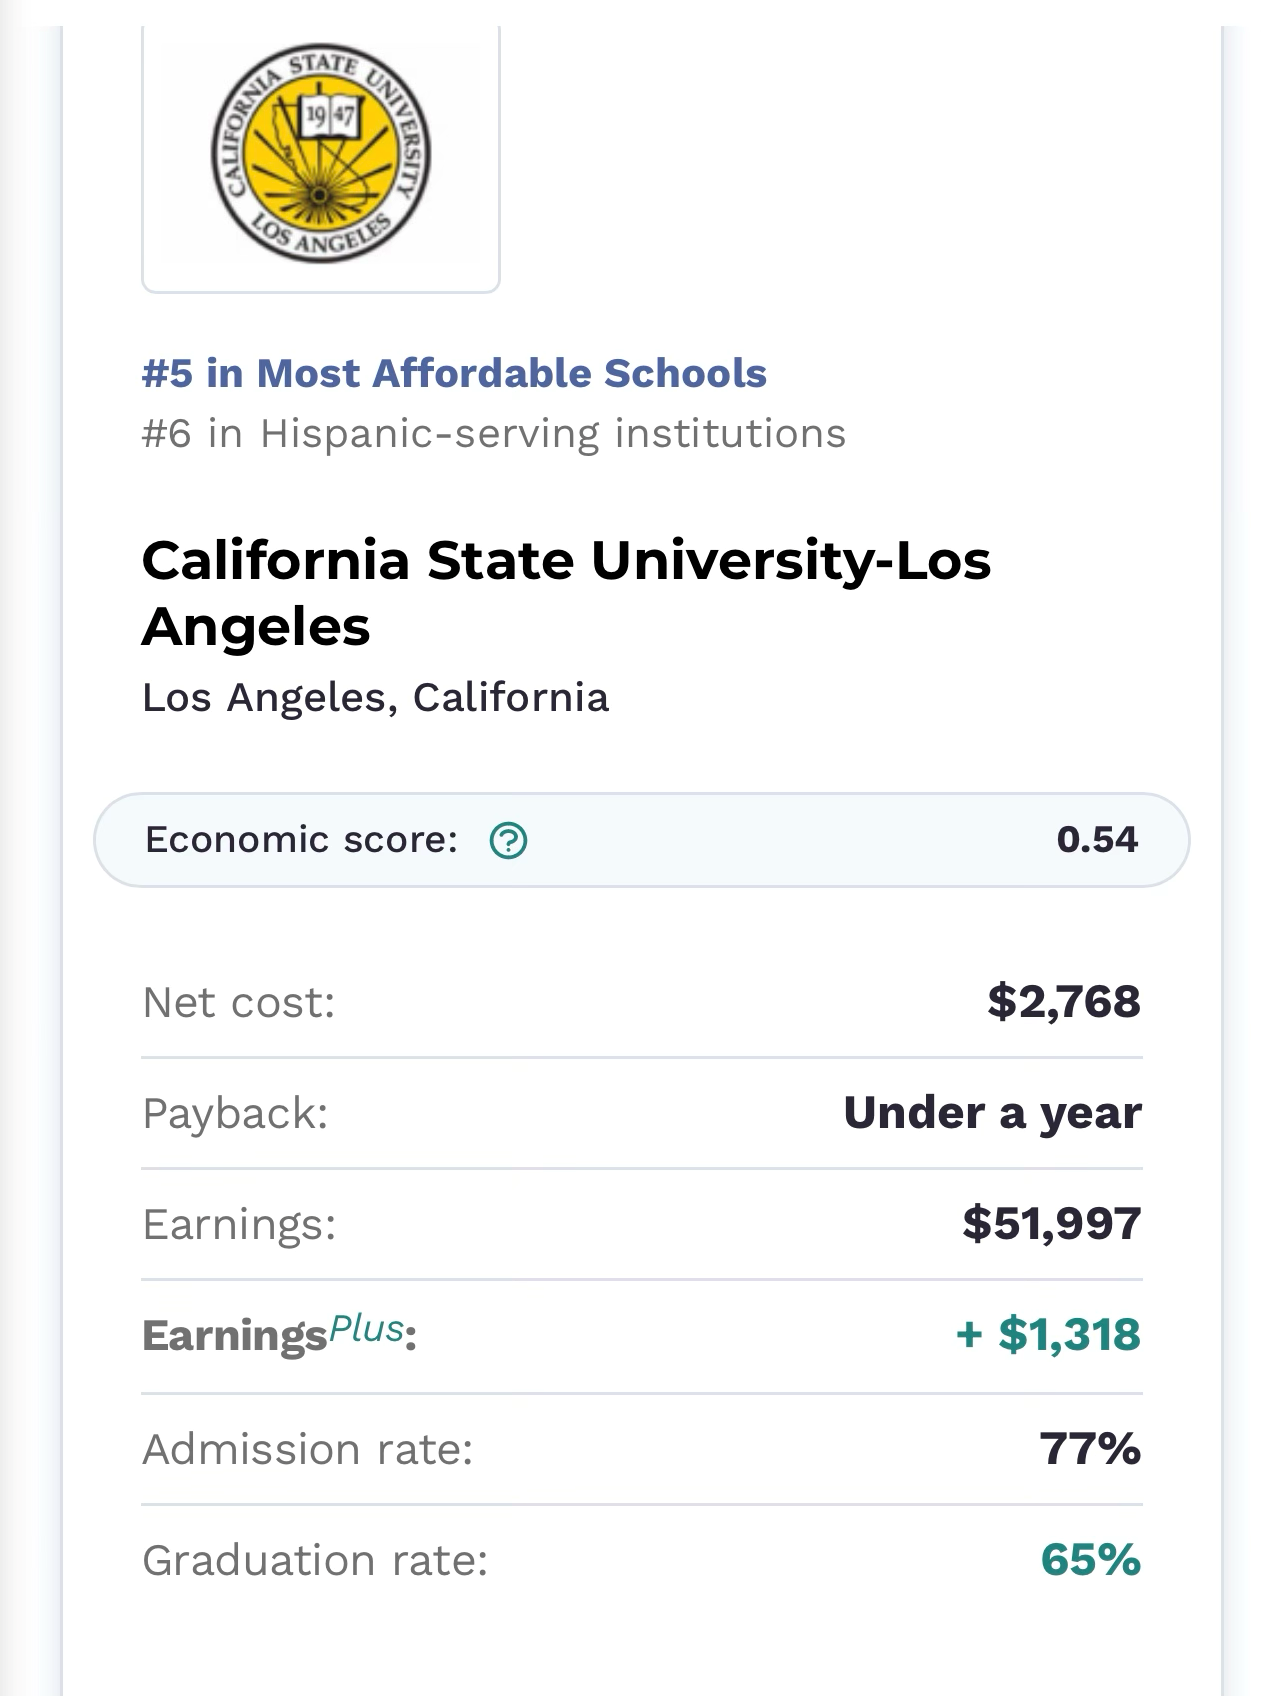 Screenshot of #5 in most affordable schools #6 in Hispanic-serving institutions California State University-Los Angeles